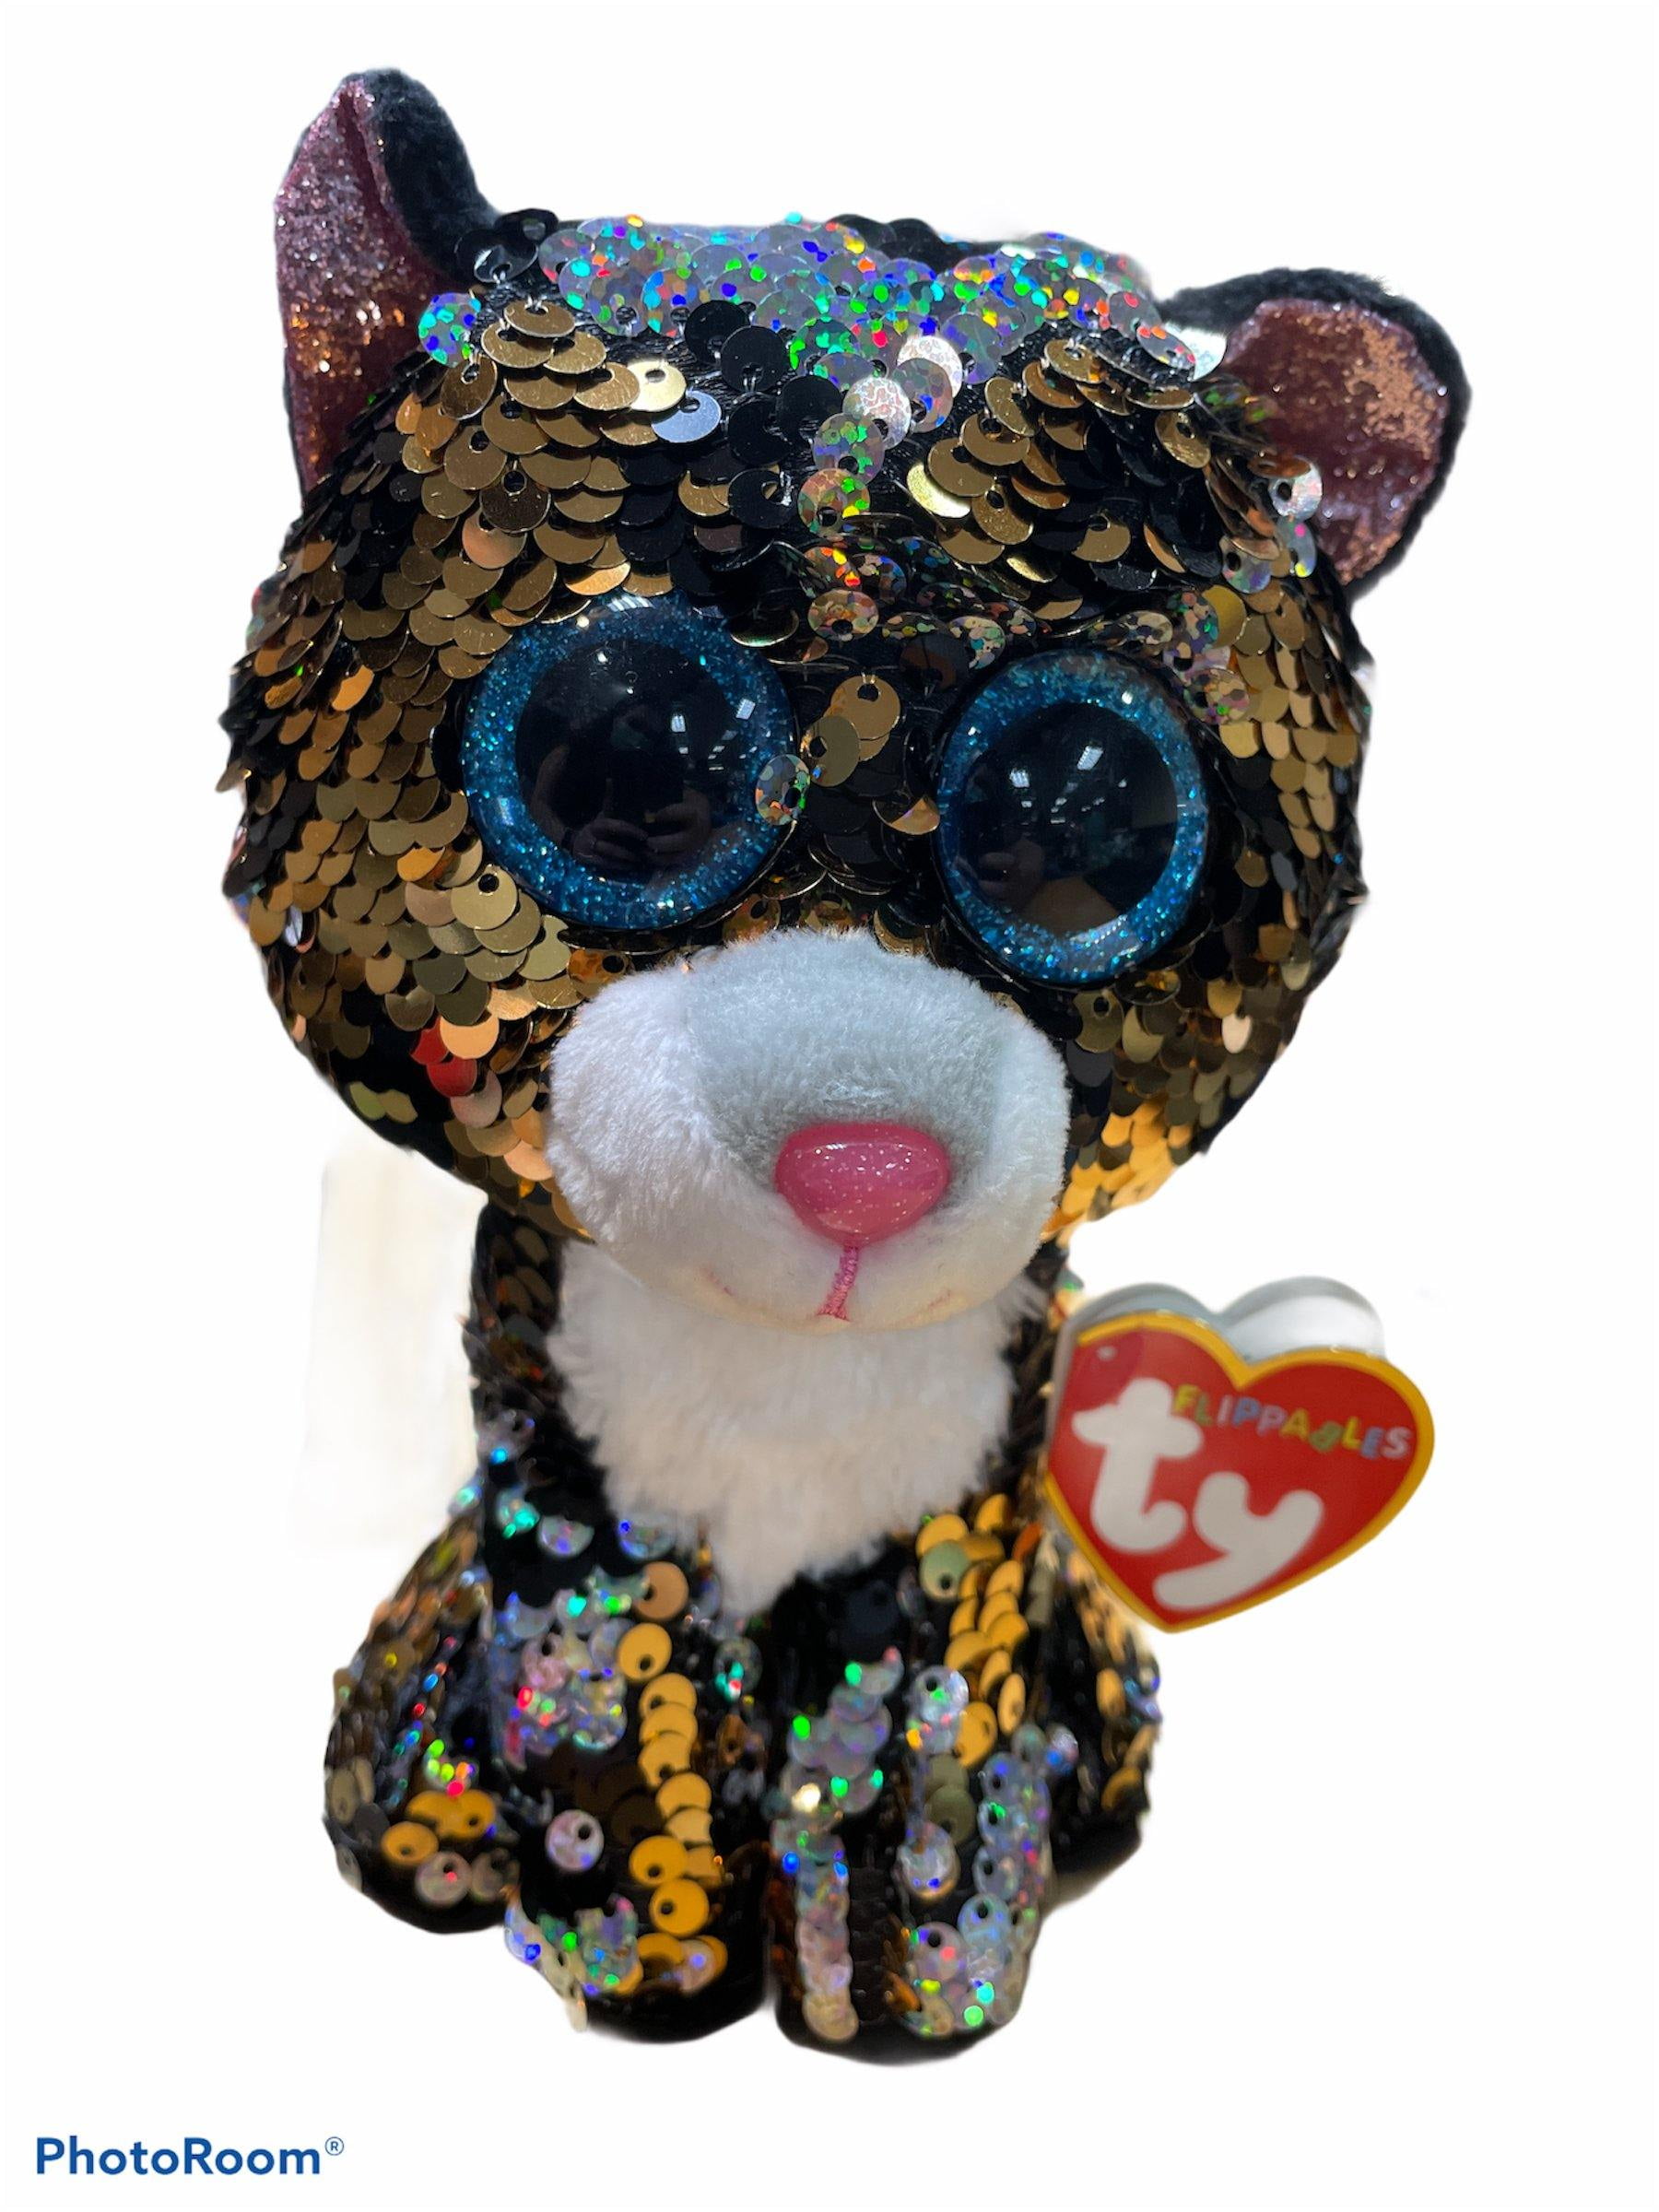 TY FLIPPABLES BEANIE BUDDIES BUDDY STERLING LEOPARD SEQUIN SOFT TOY NEW WITH TAG 